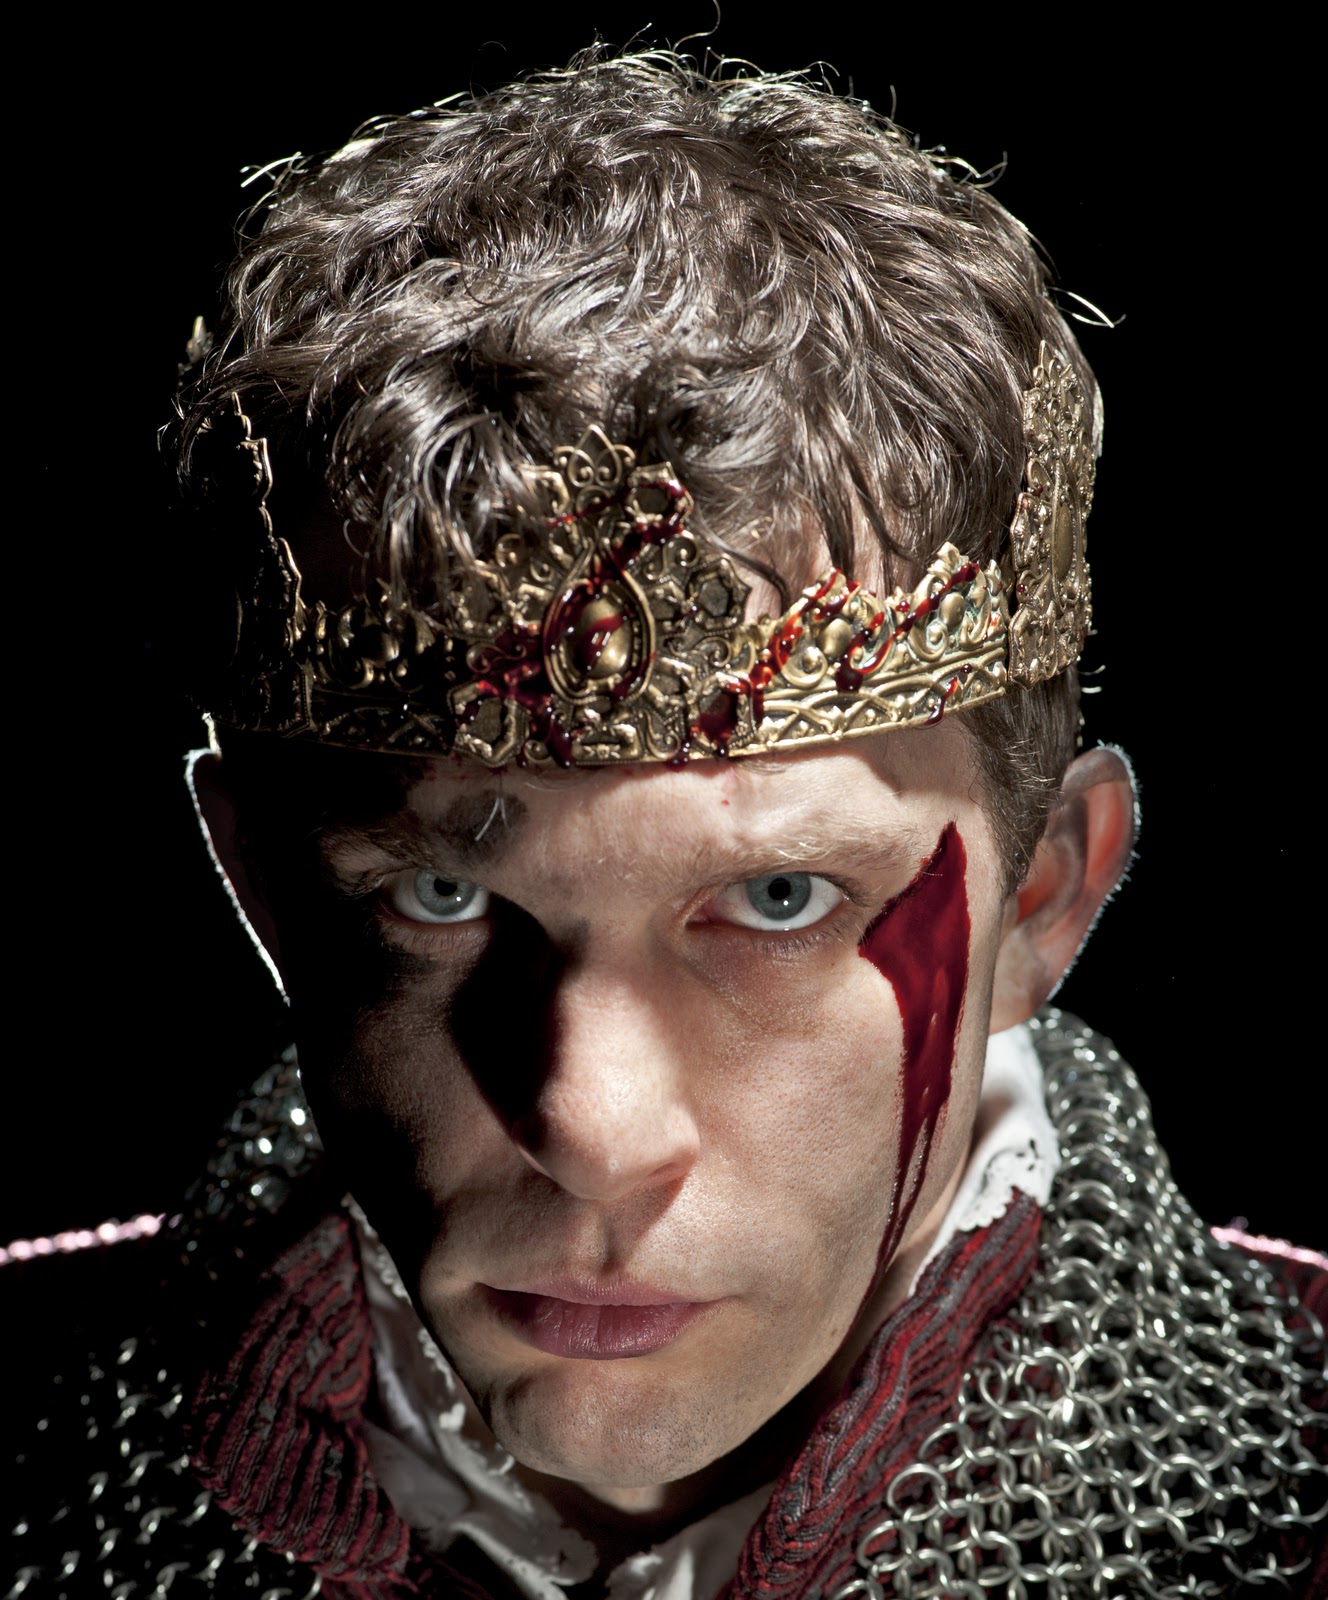 Mississippi State welcomes the American Shakespeare Center to campus Feb. 16 for its production of "Henry V."